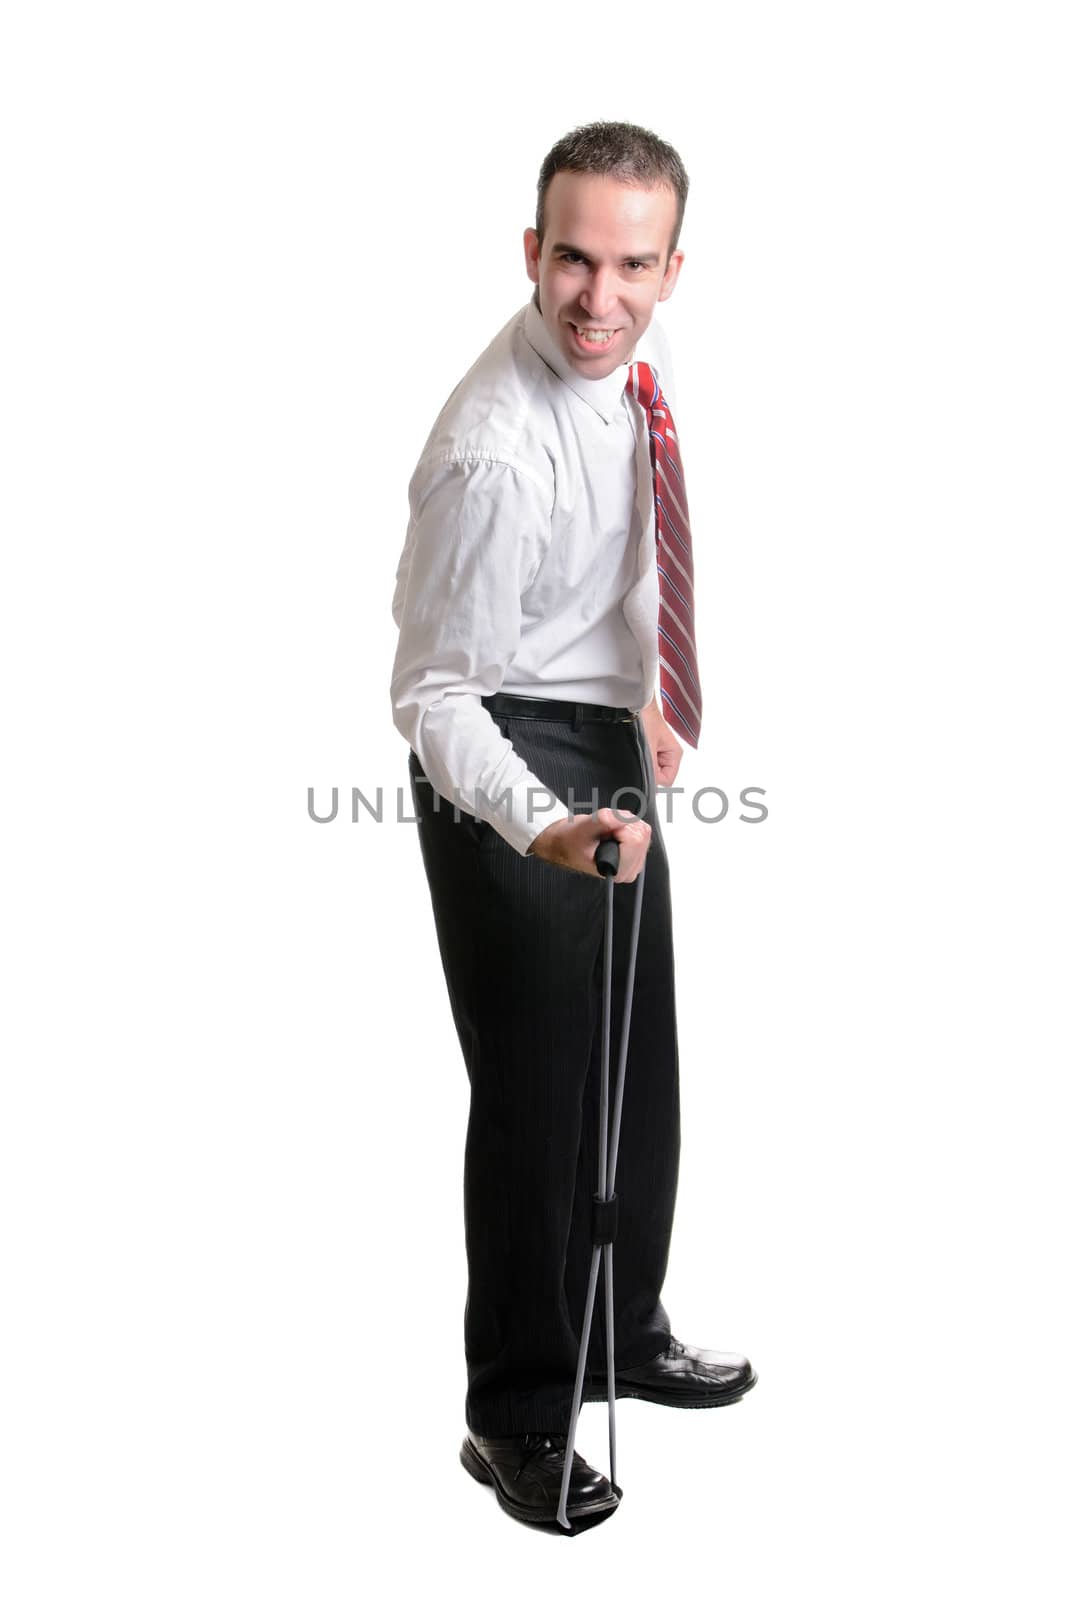 An employee using a resistance band for exercise, isolated against a white background.